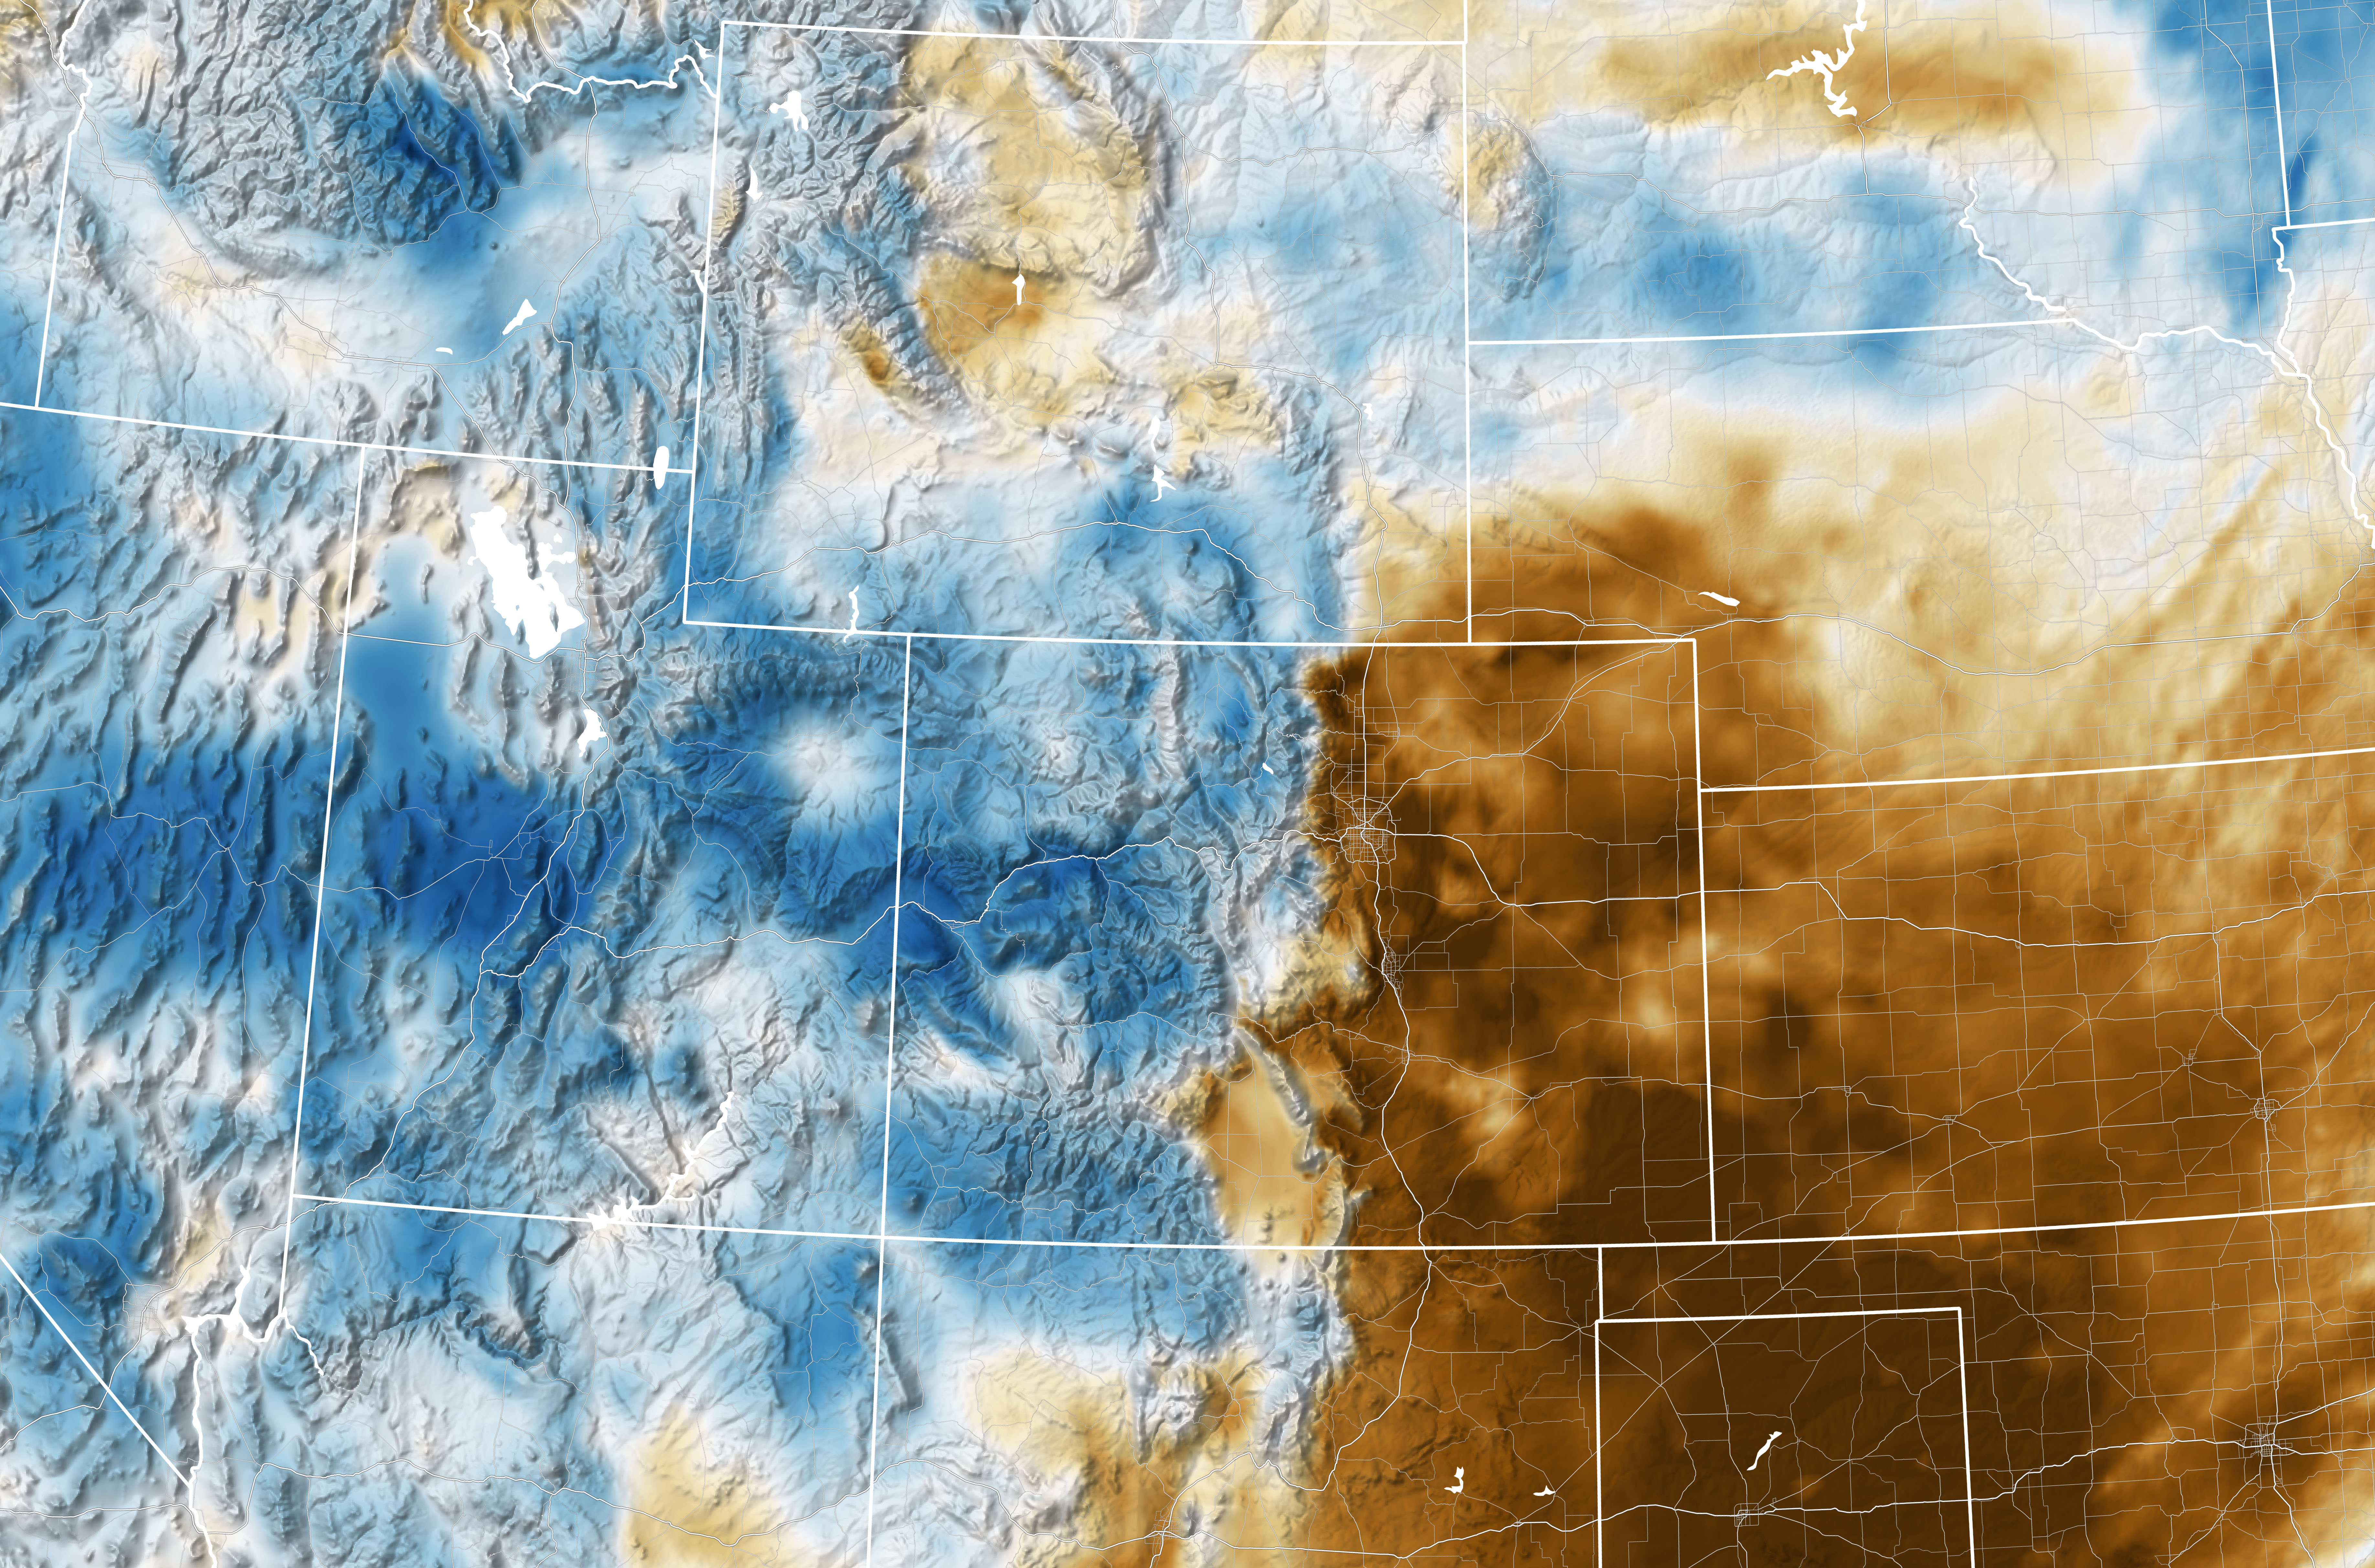 Colorado Faces Winter Urban Firestorm - related image preview